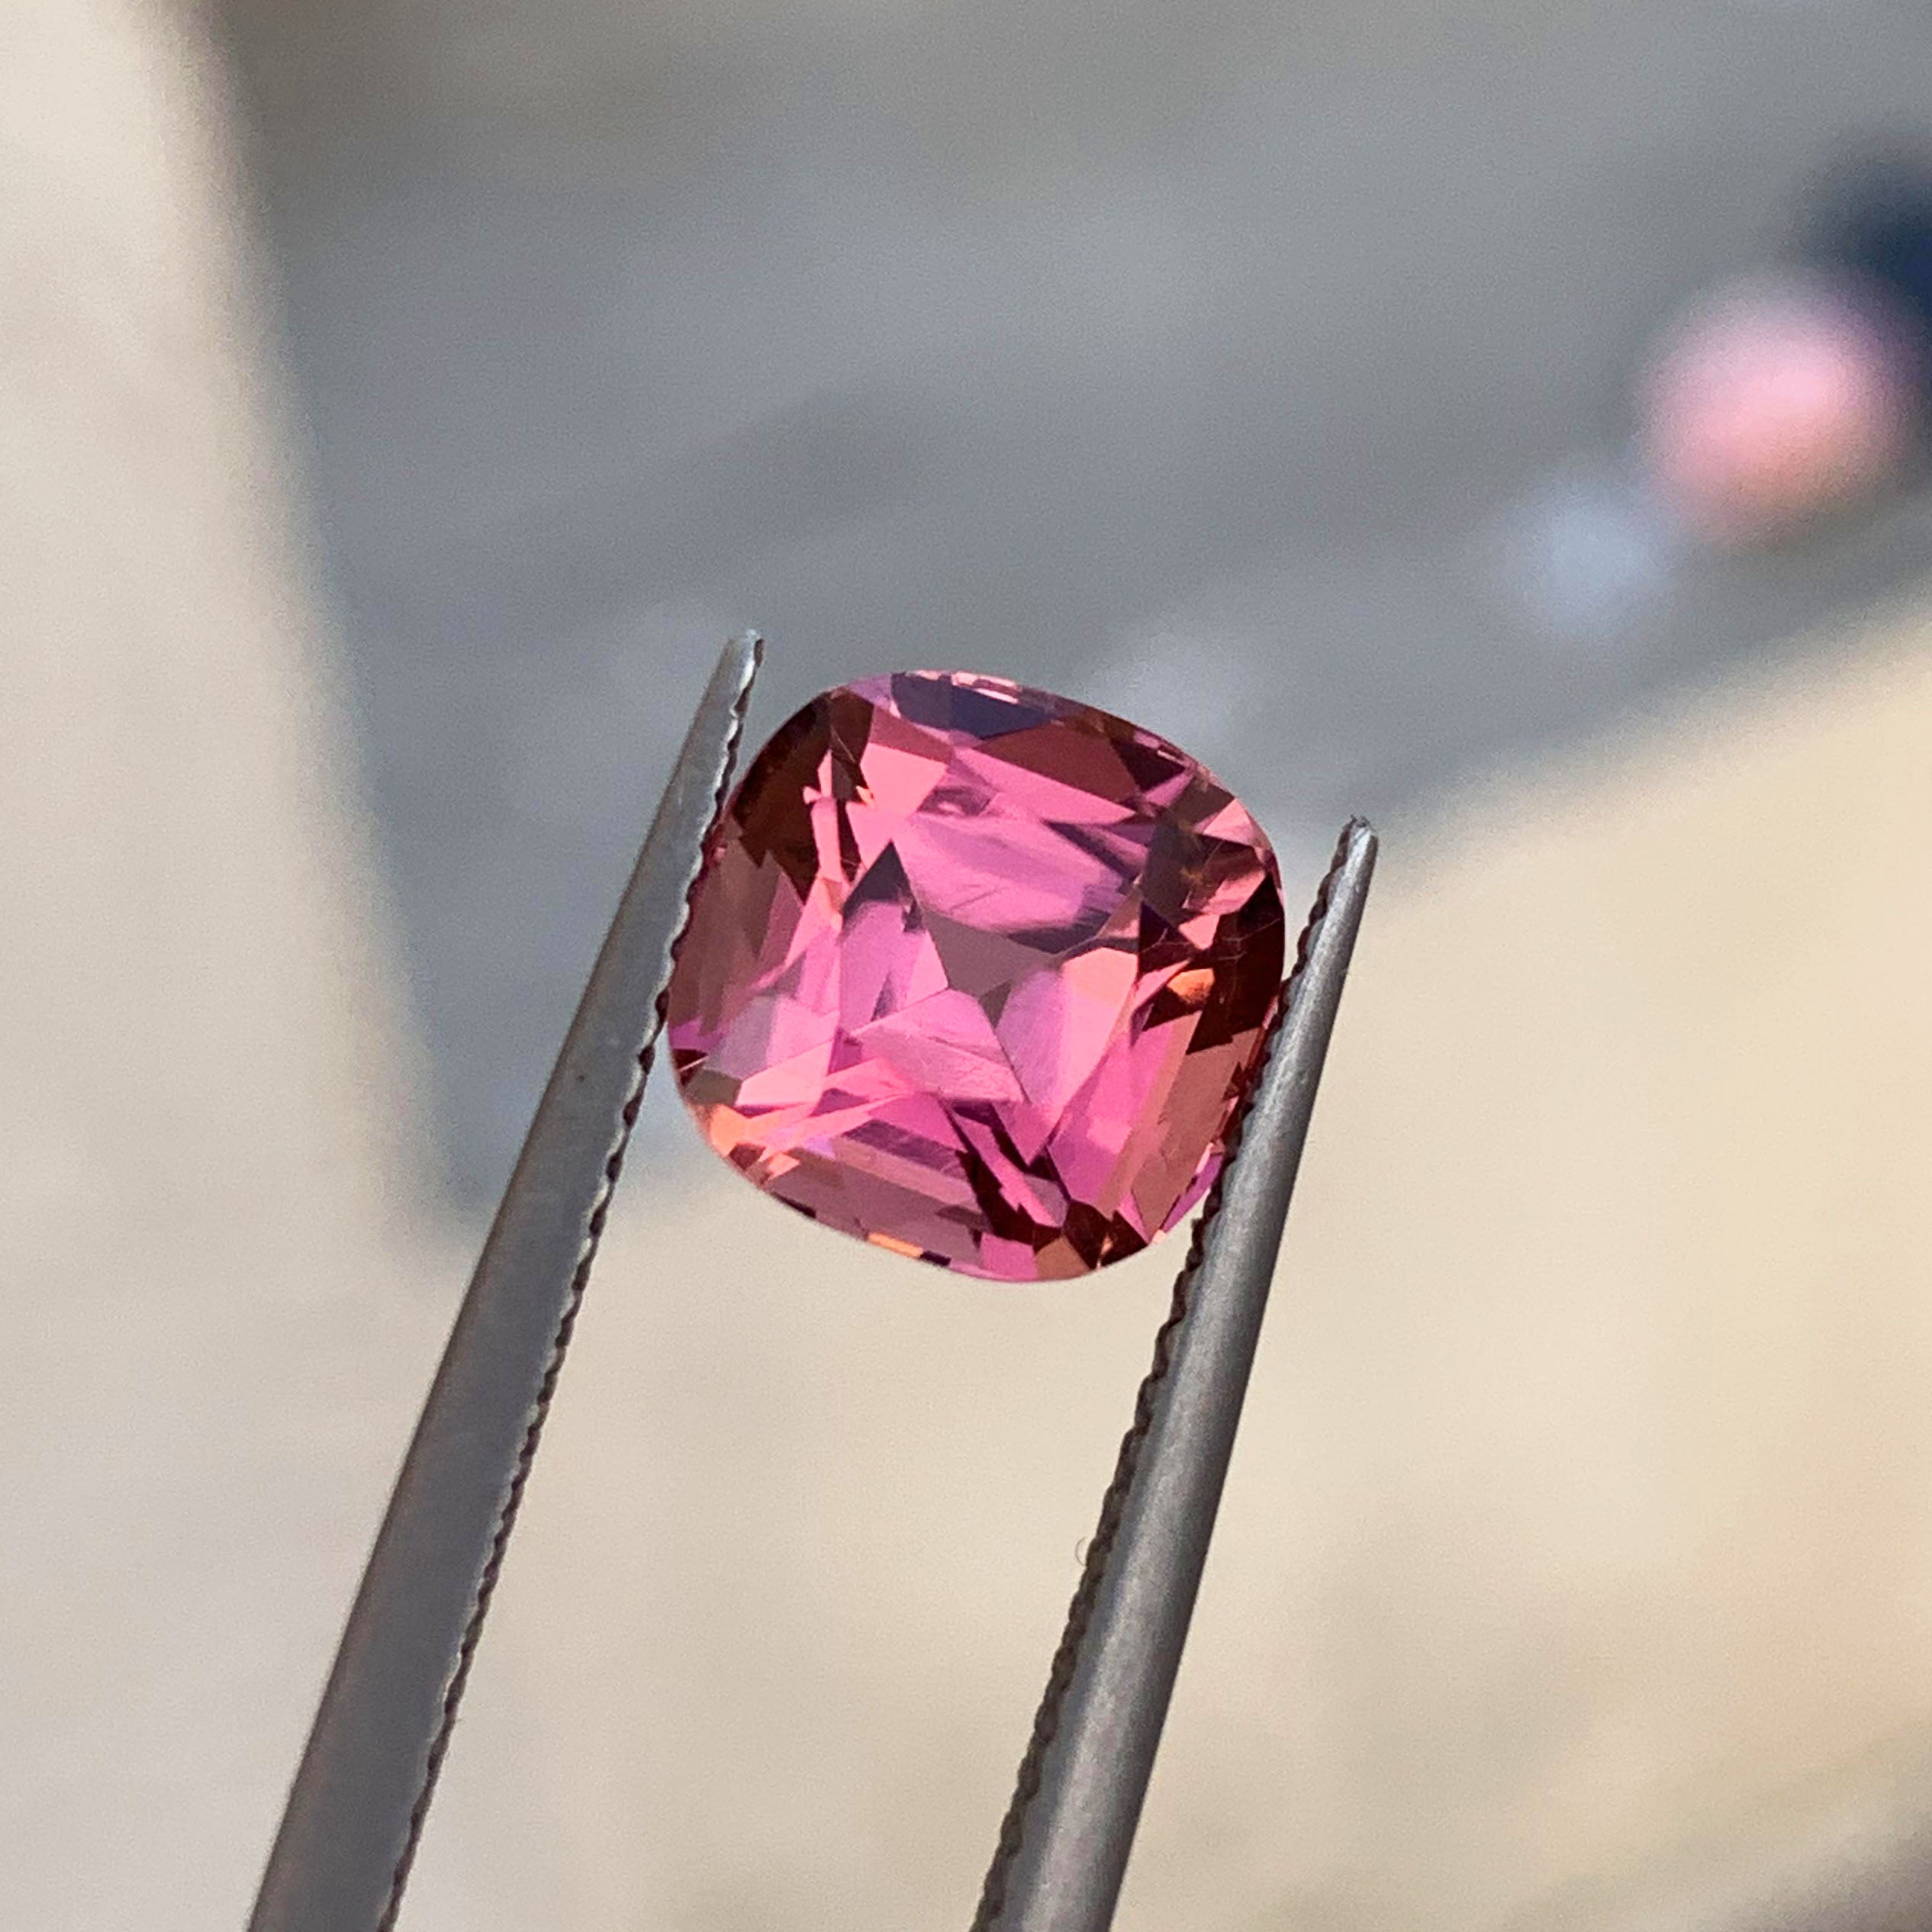 Pink Tourmaline Loose Gemstone, Faceted Tourmaline Stone For Ring, 4.10 CT